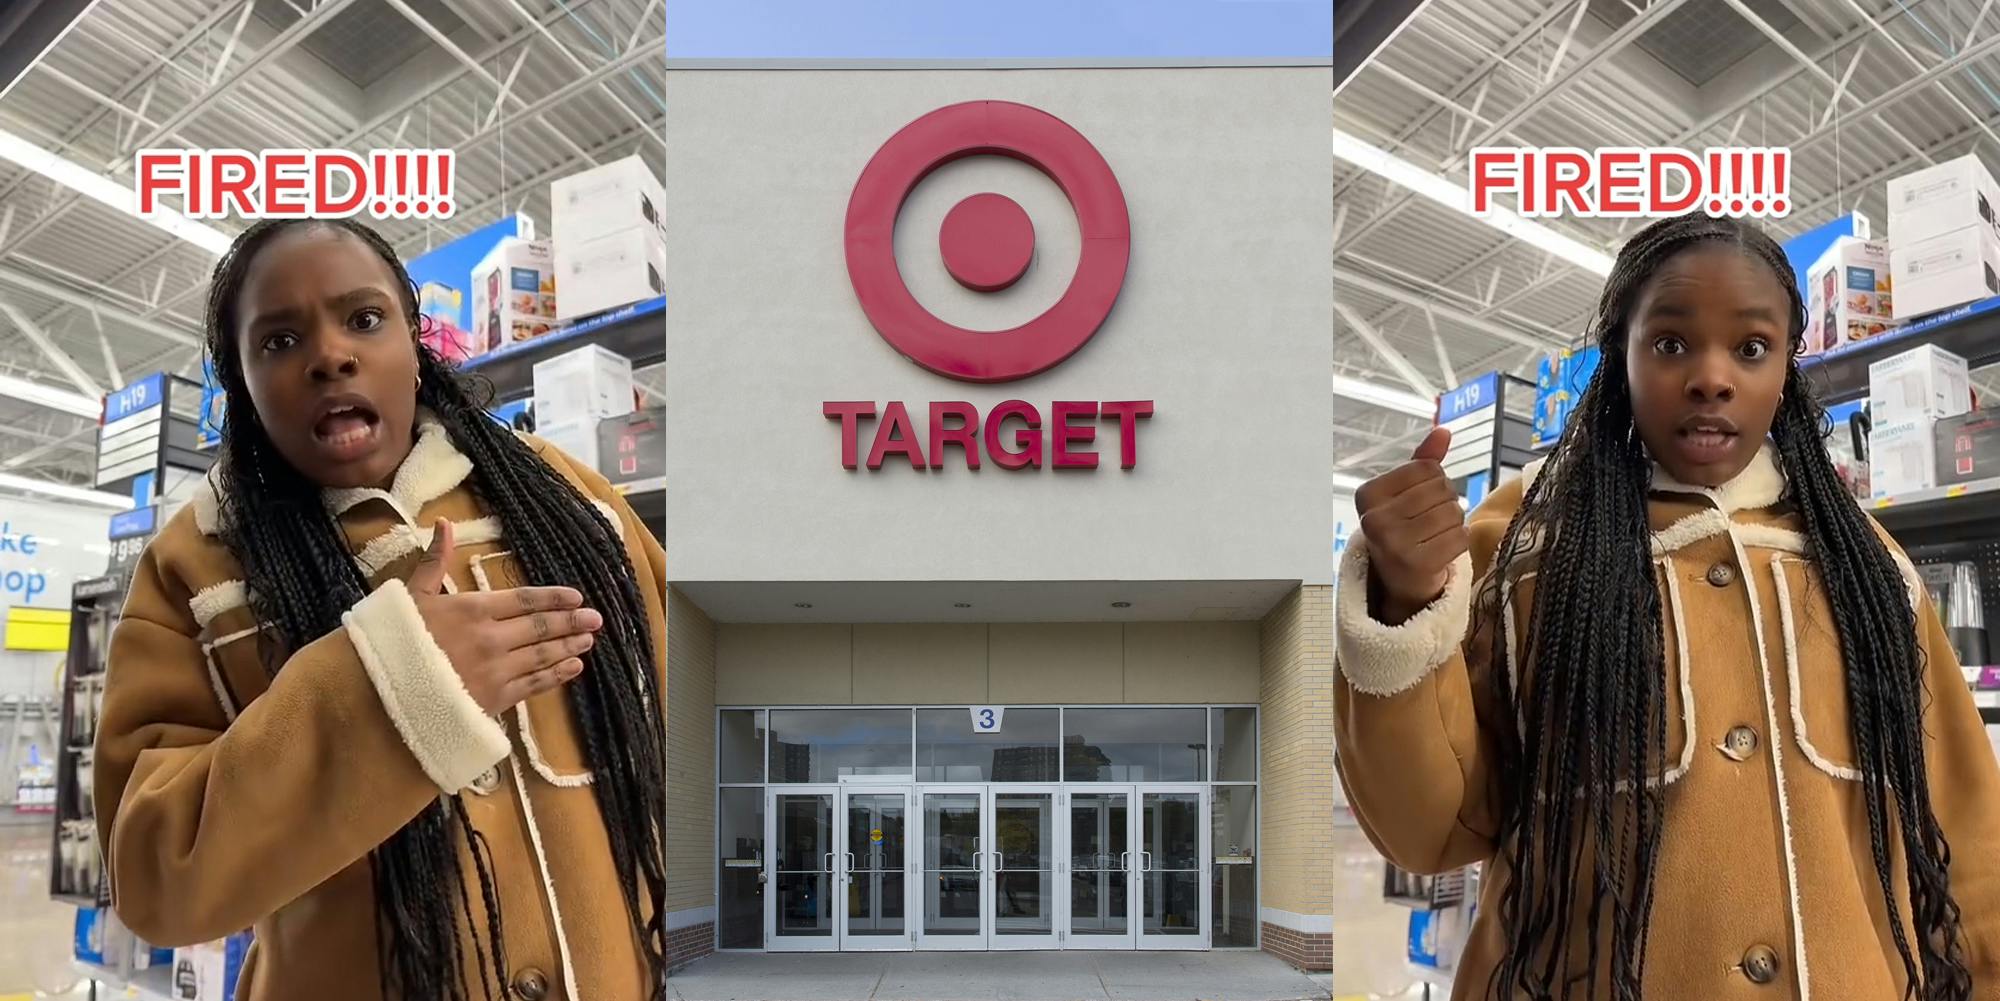 former Target employee speaking with hand pointing right with caption "FIRED!!!!" (l) Target store building with sign (c) former Target employee speaking with caption "FIRED!!!!" (r)